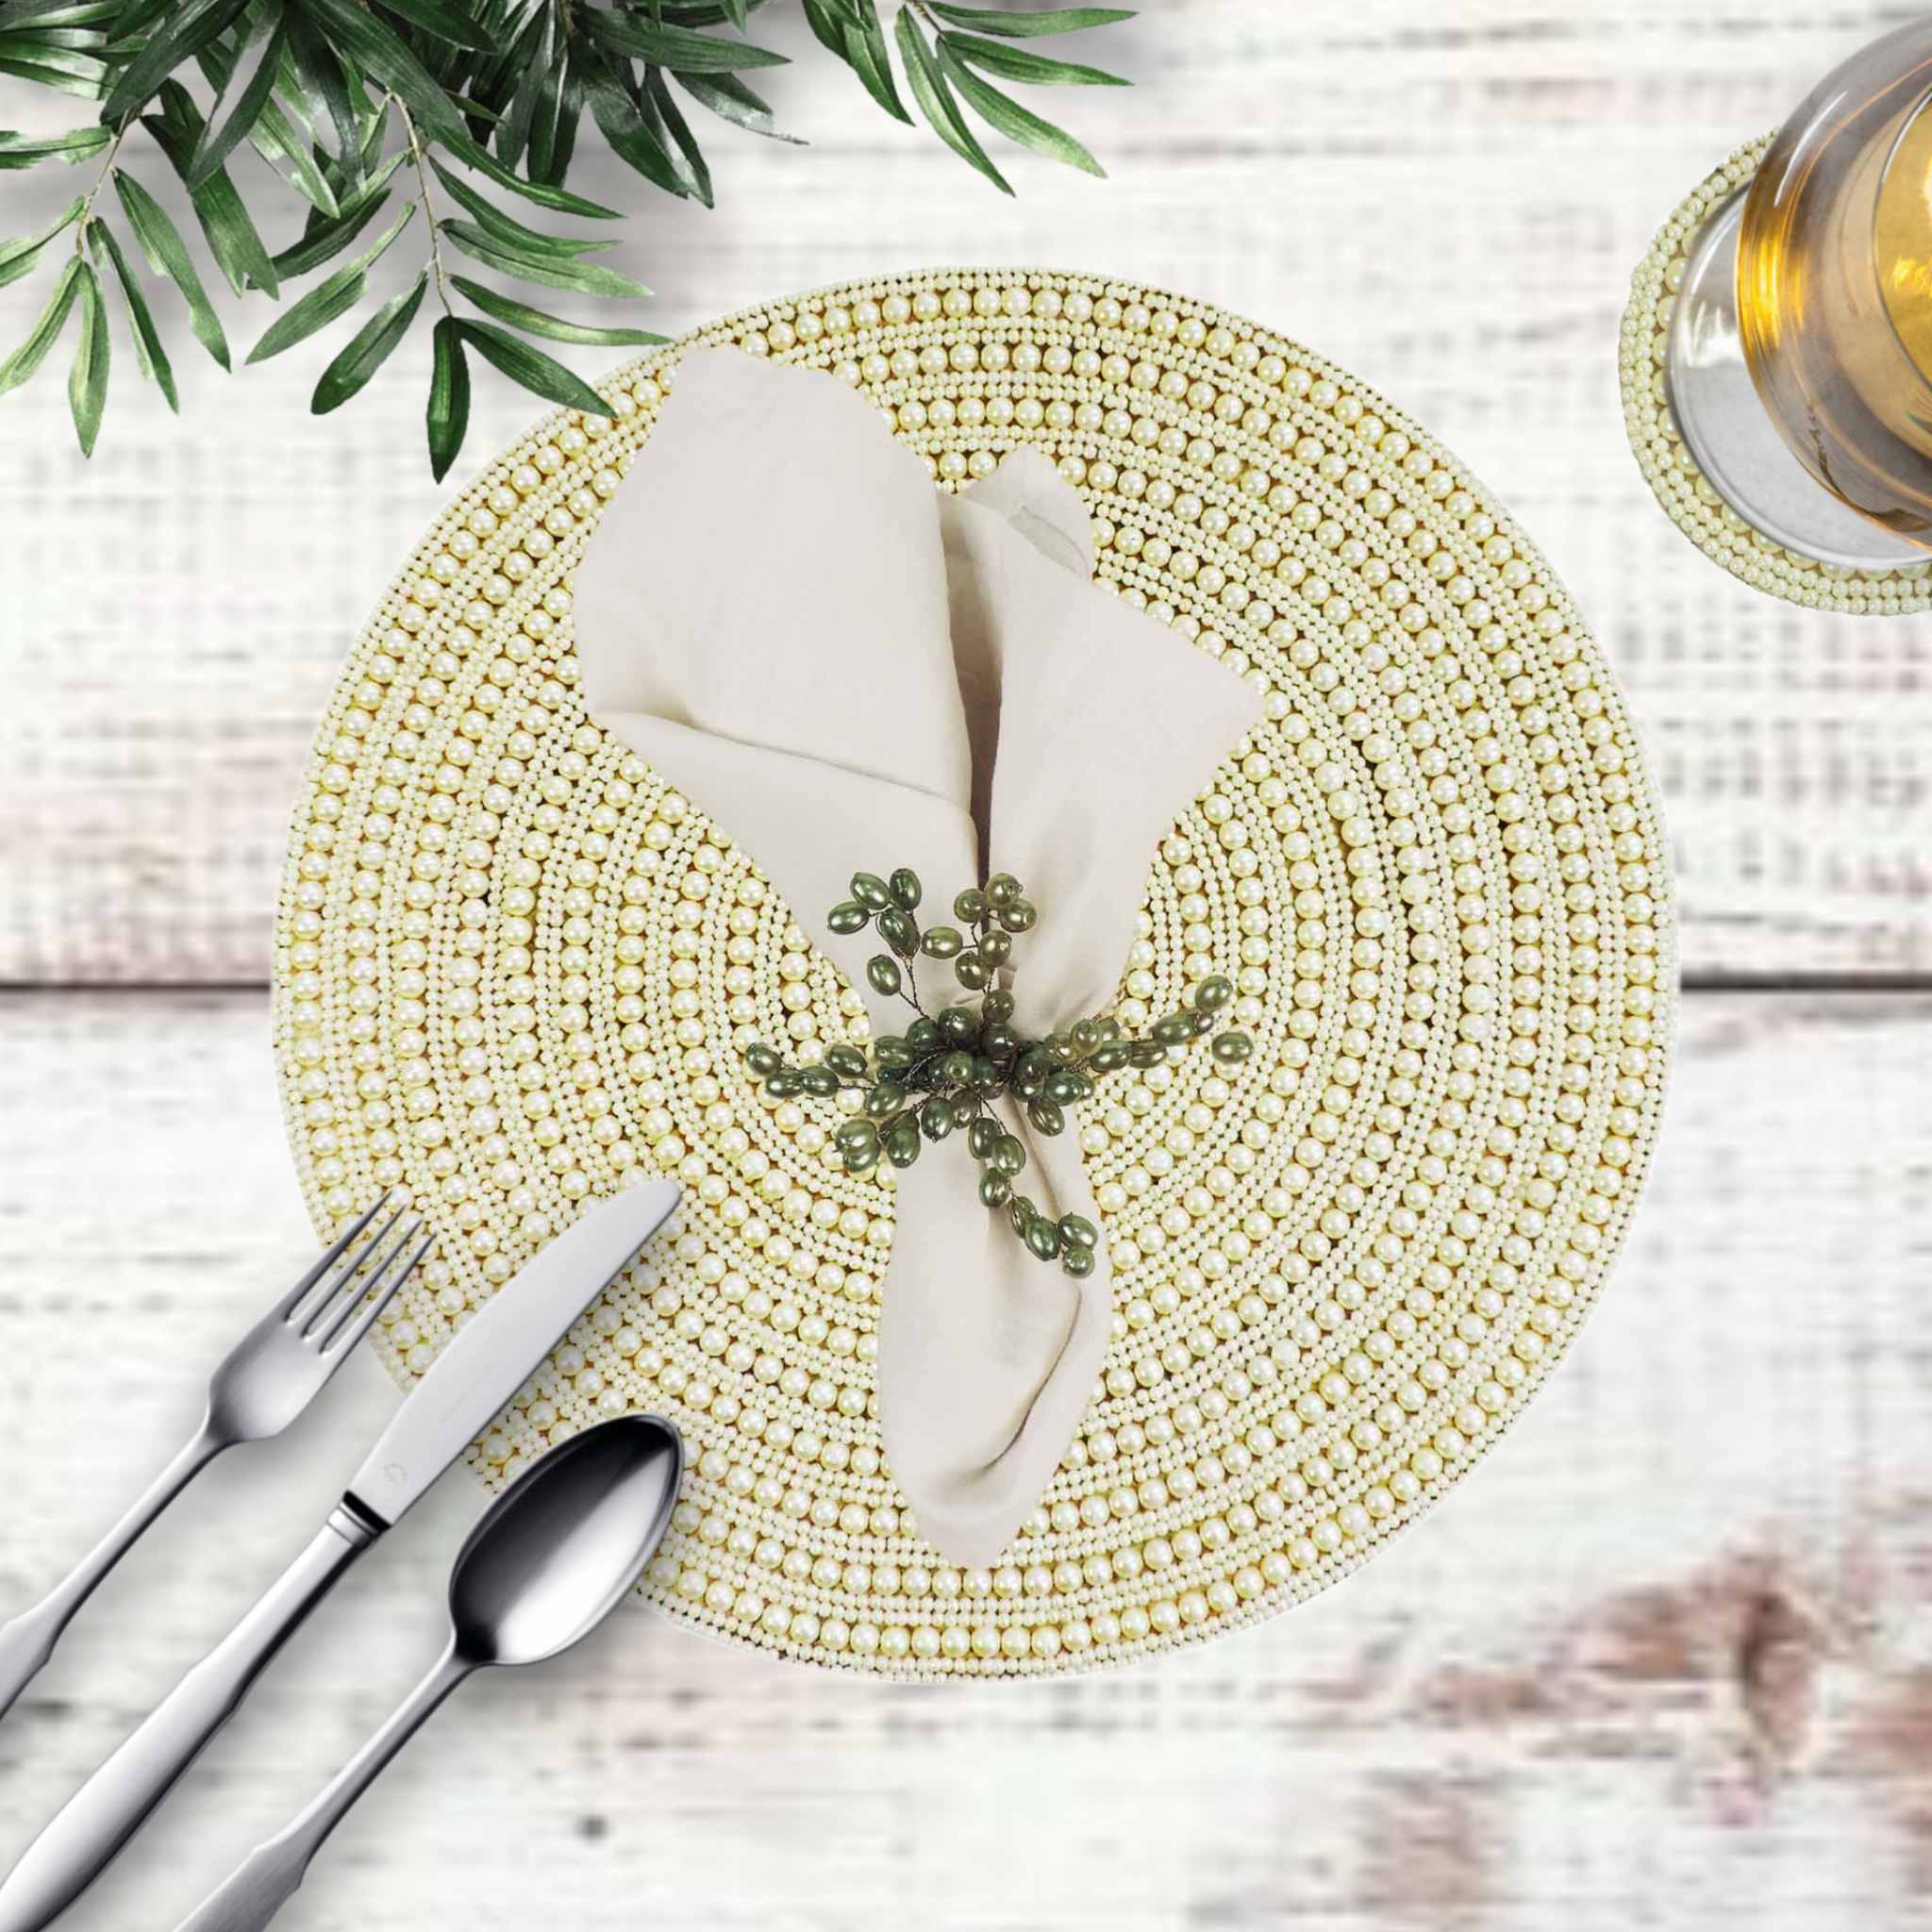 Whirl Bead Embroidered Placemat in Cream, Set of 2/4